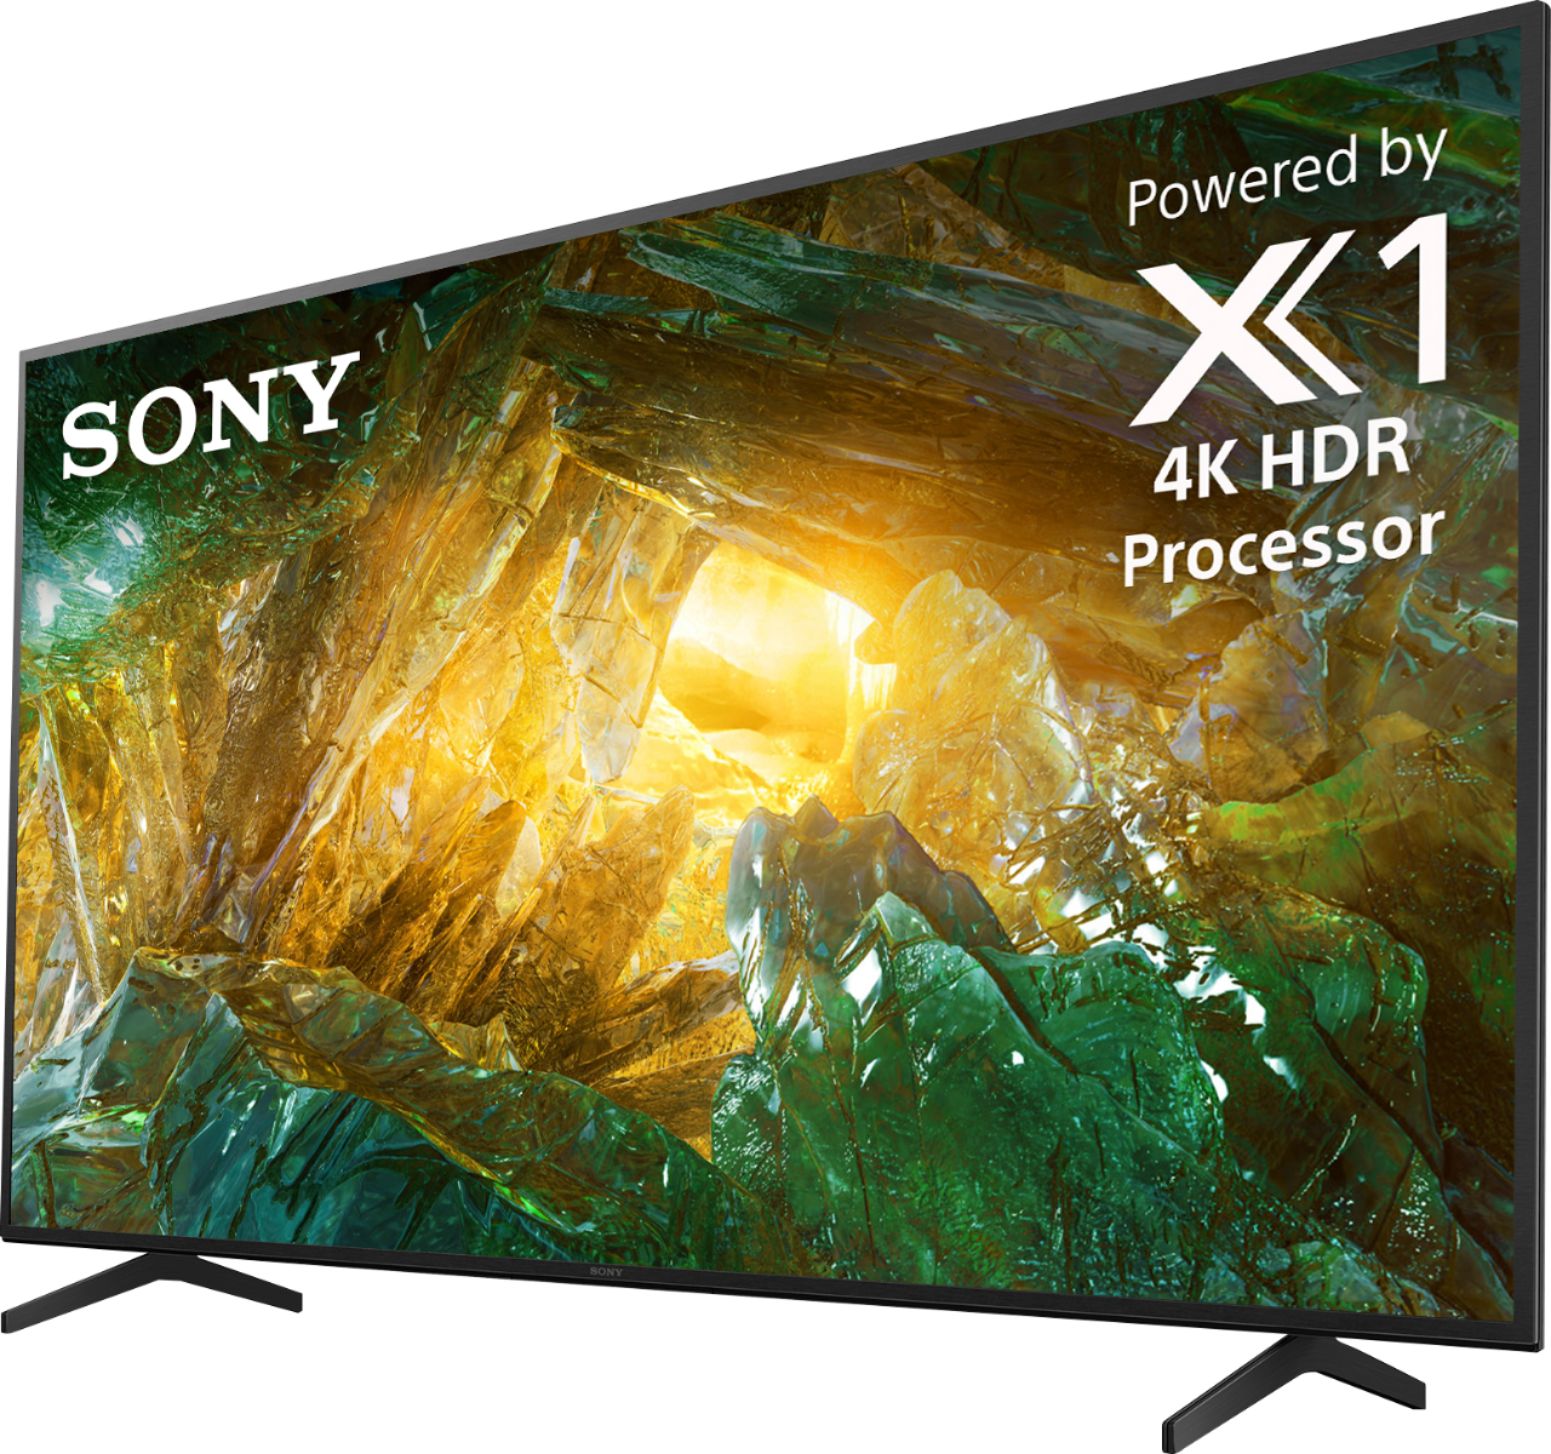 Left View: Sony - 75" Class XBR X800H Series LED 4K UHD Smart Android TV